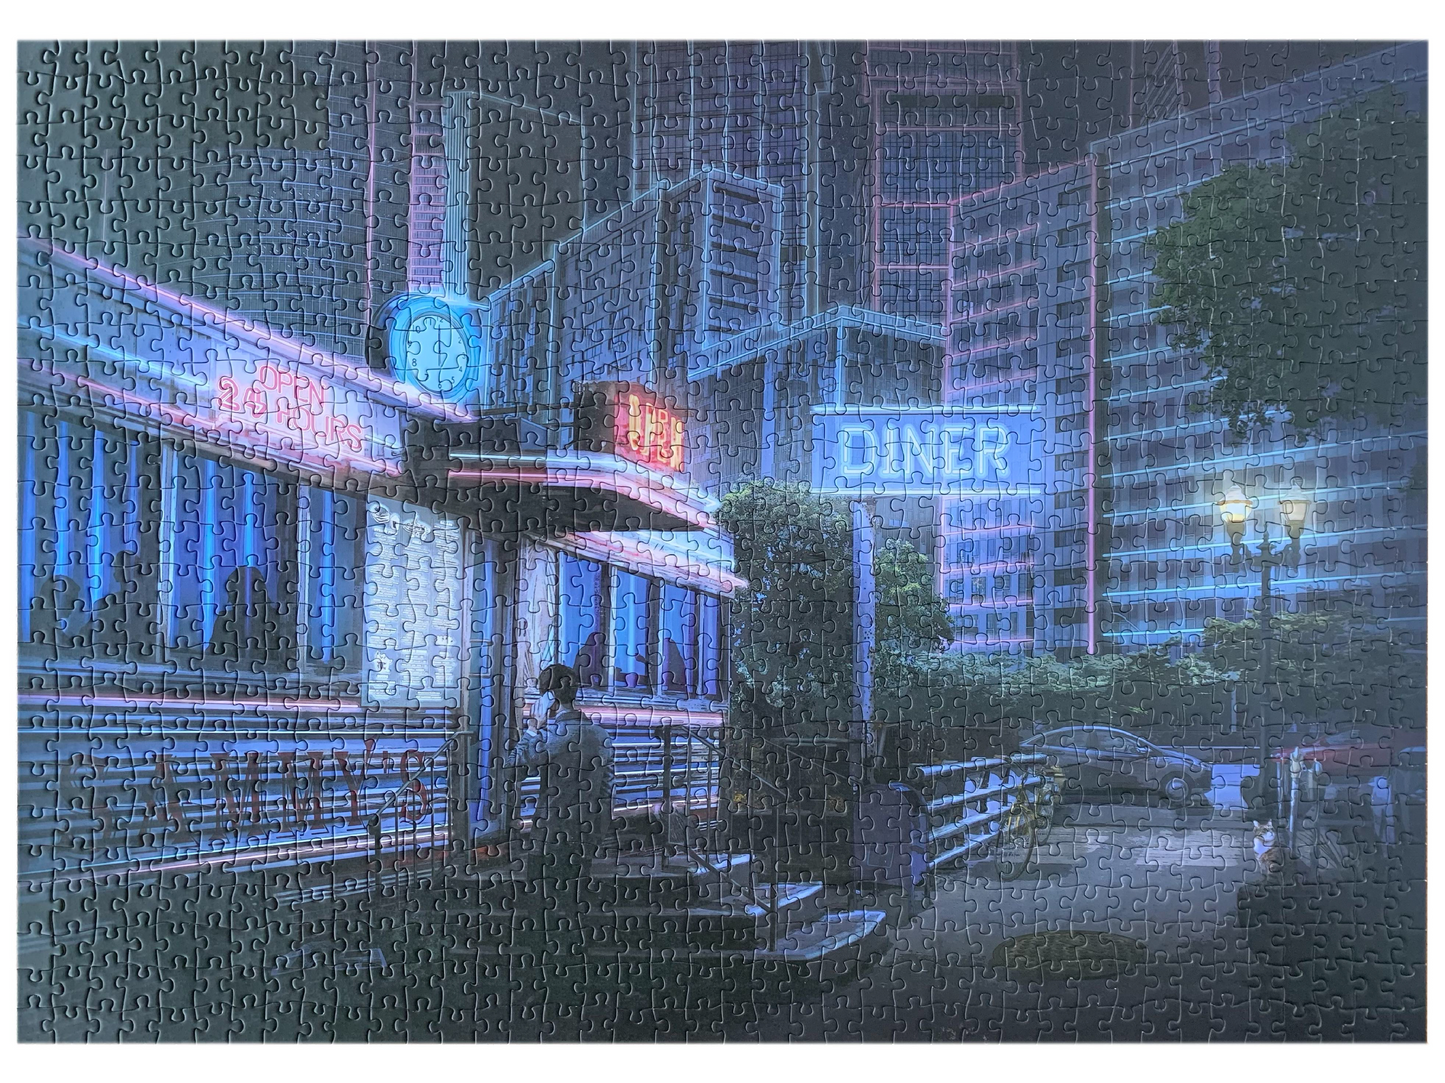 Over-Bored Puzzles: Sammy's Diner